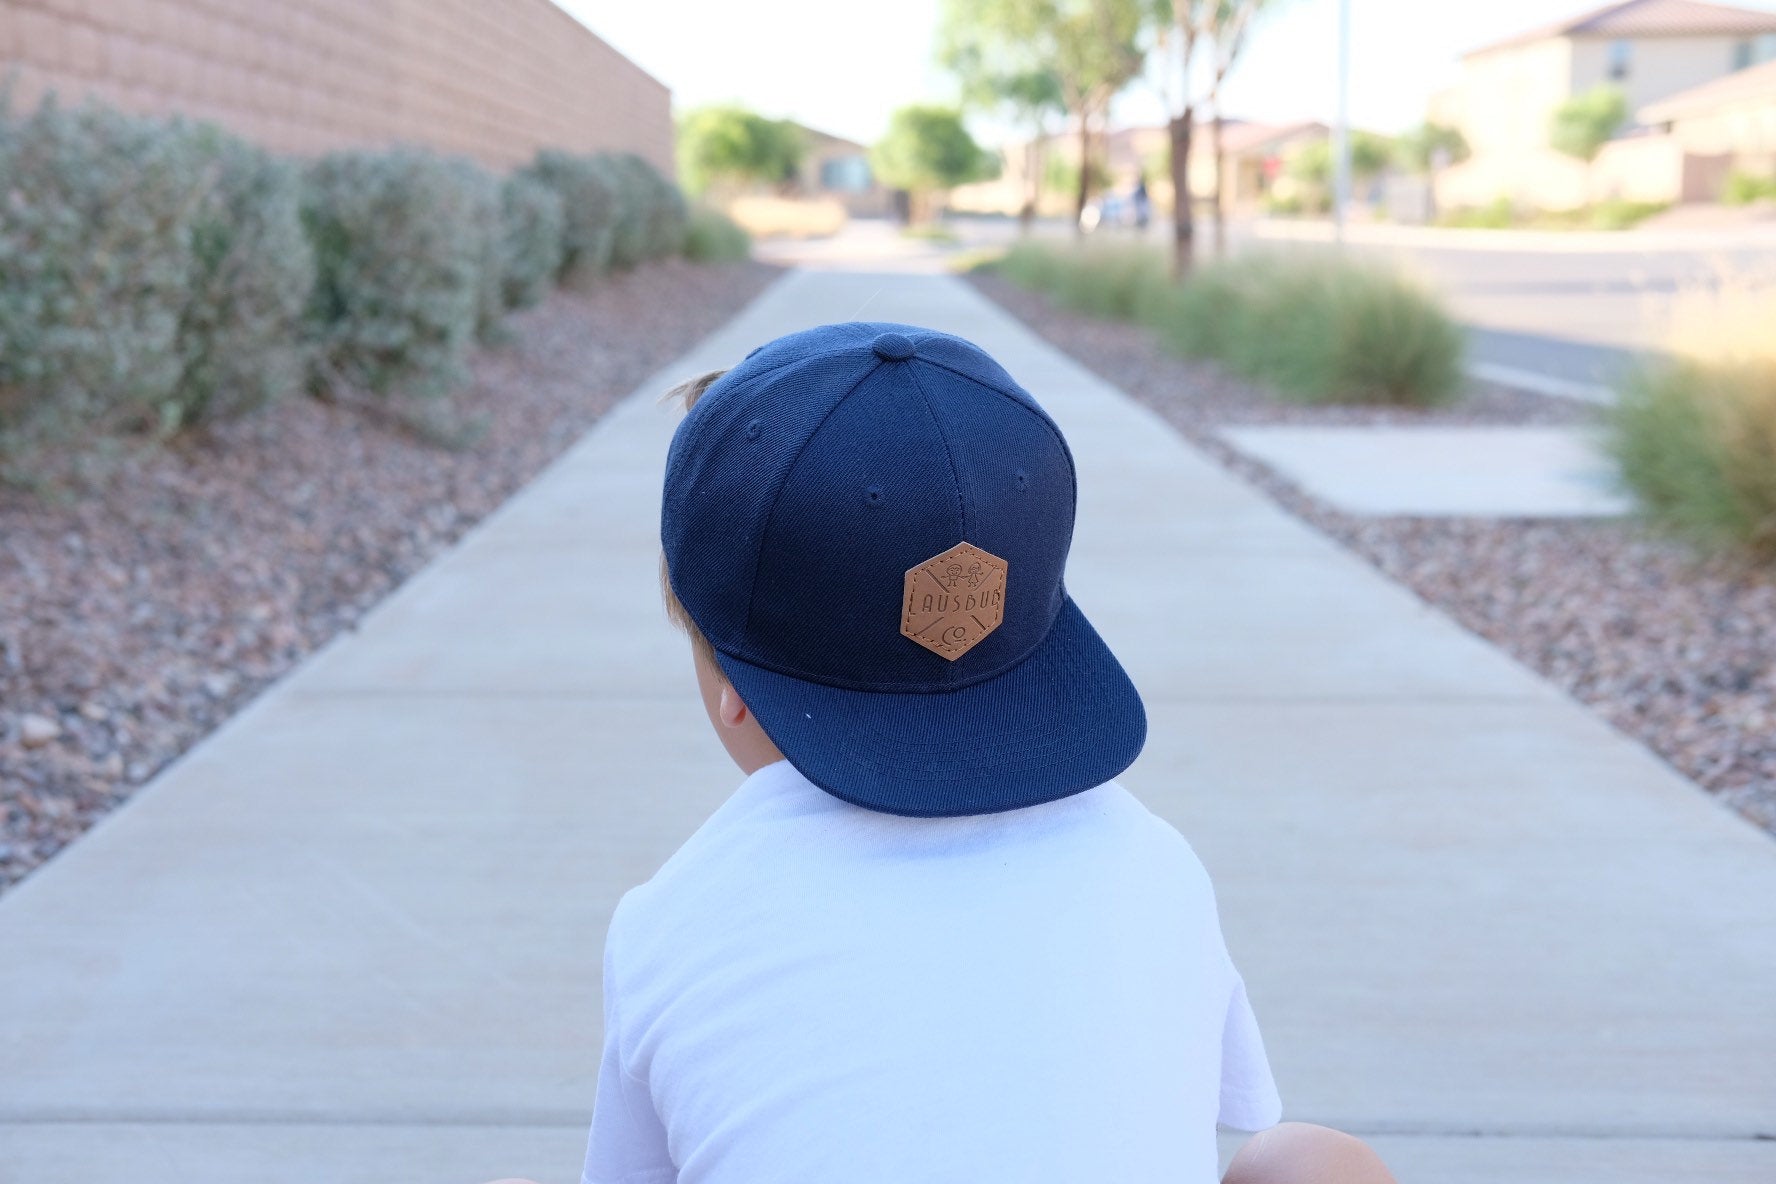 Navy blue toddler and kids snapback baseball cap with faux leather logo patch, great cap for babies and toddlers!